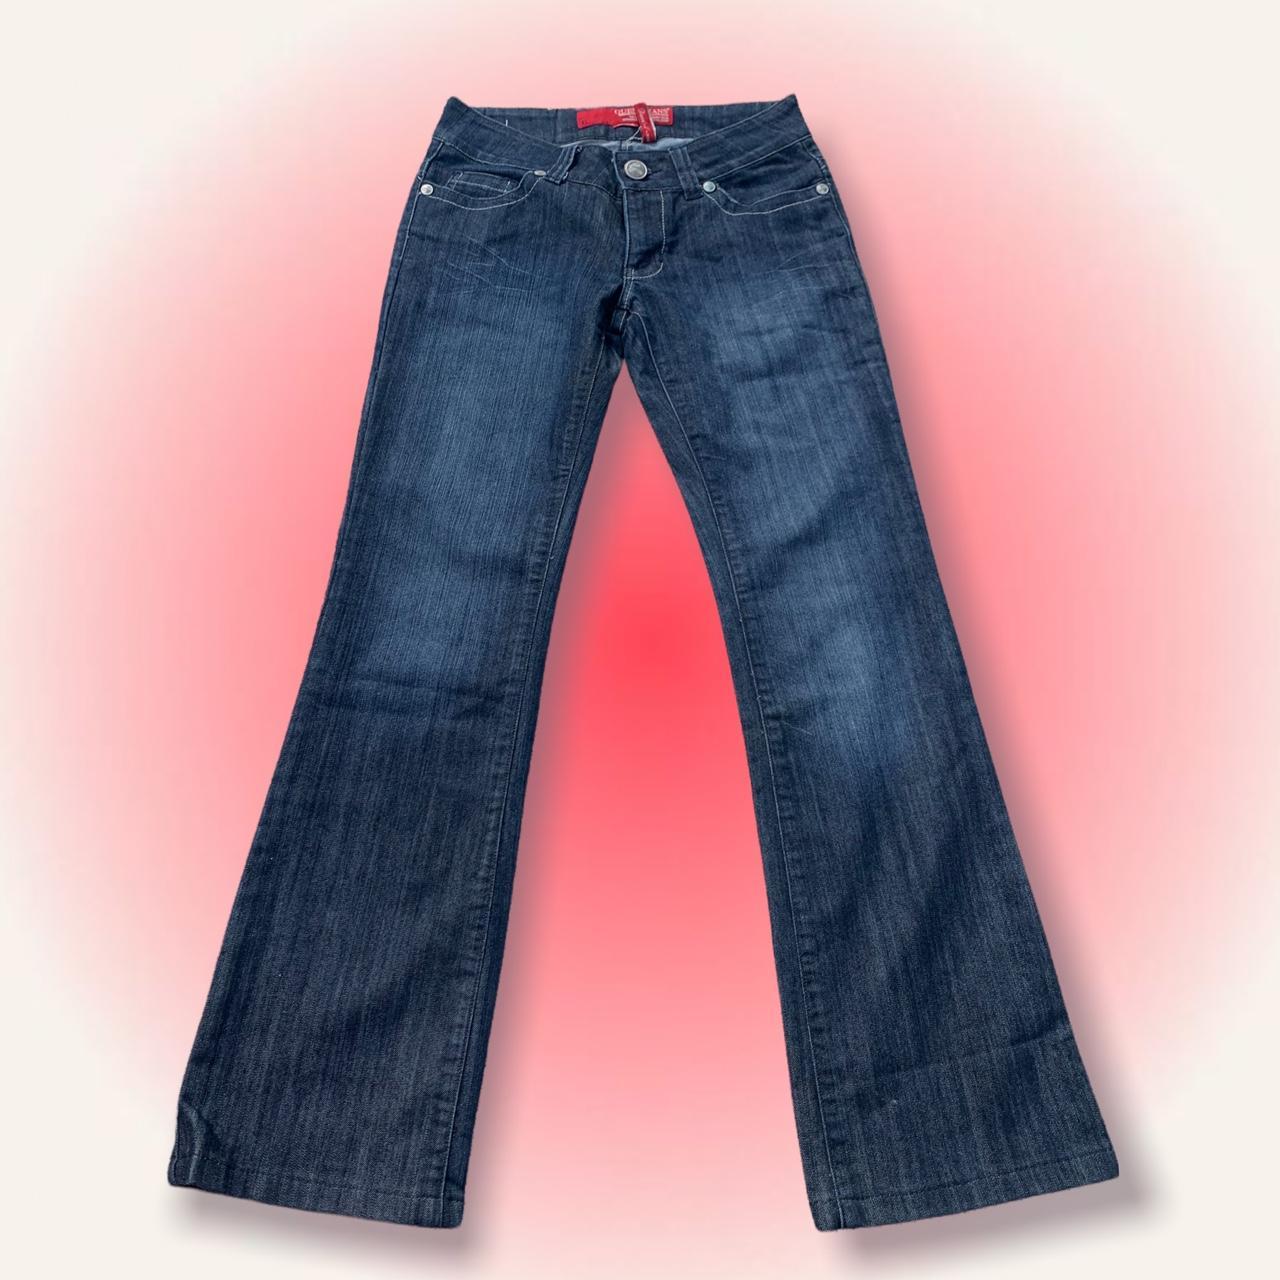 💓Y2k lowrise GUESS Jeans 🦋💖 ️ bootcut flare jeans... - Depop